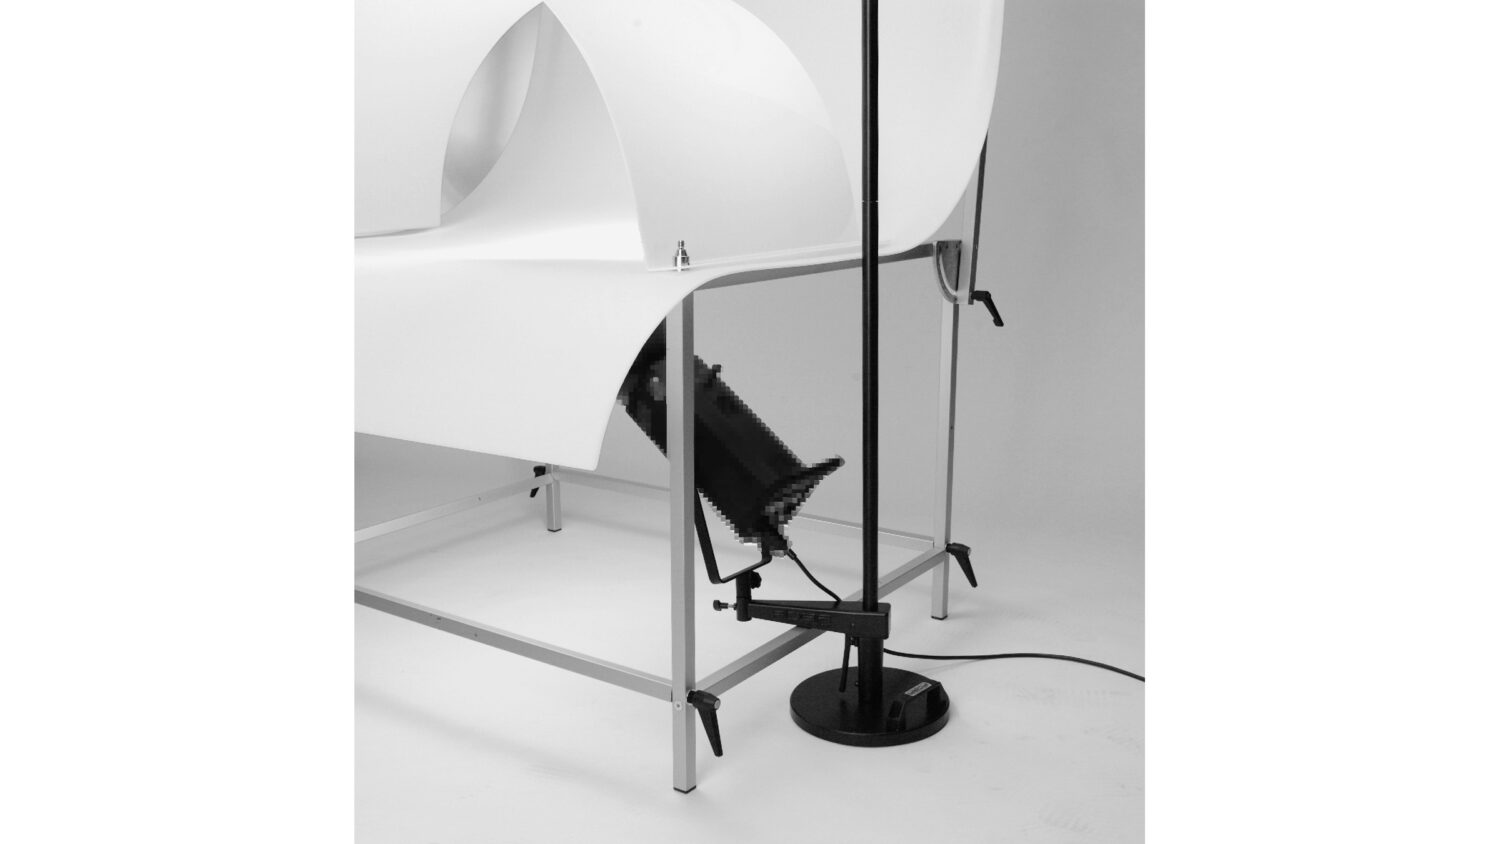 FOBA acryl shooting table with lamp stand application